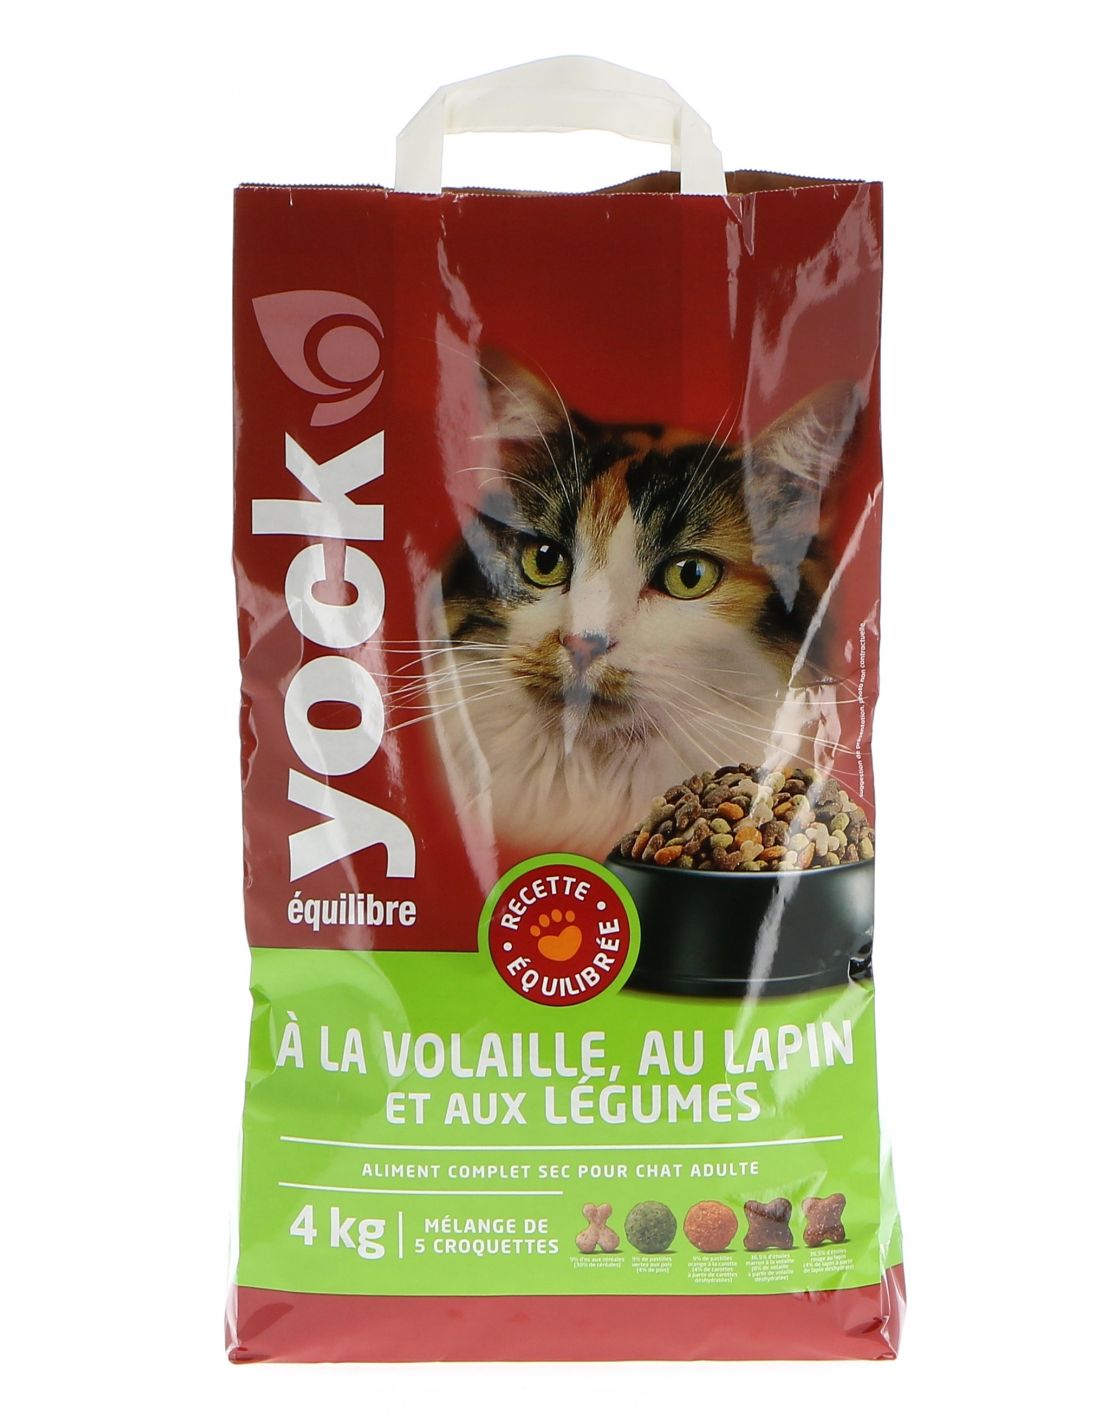 YOCK EQUILIBRE CHAT VOLAILLE,LAPIN ET LEGUMES